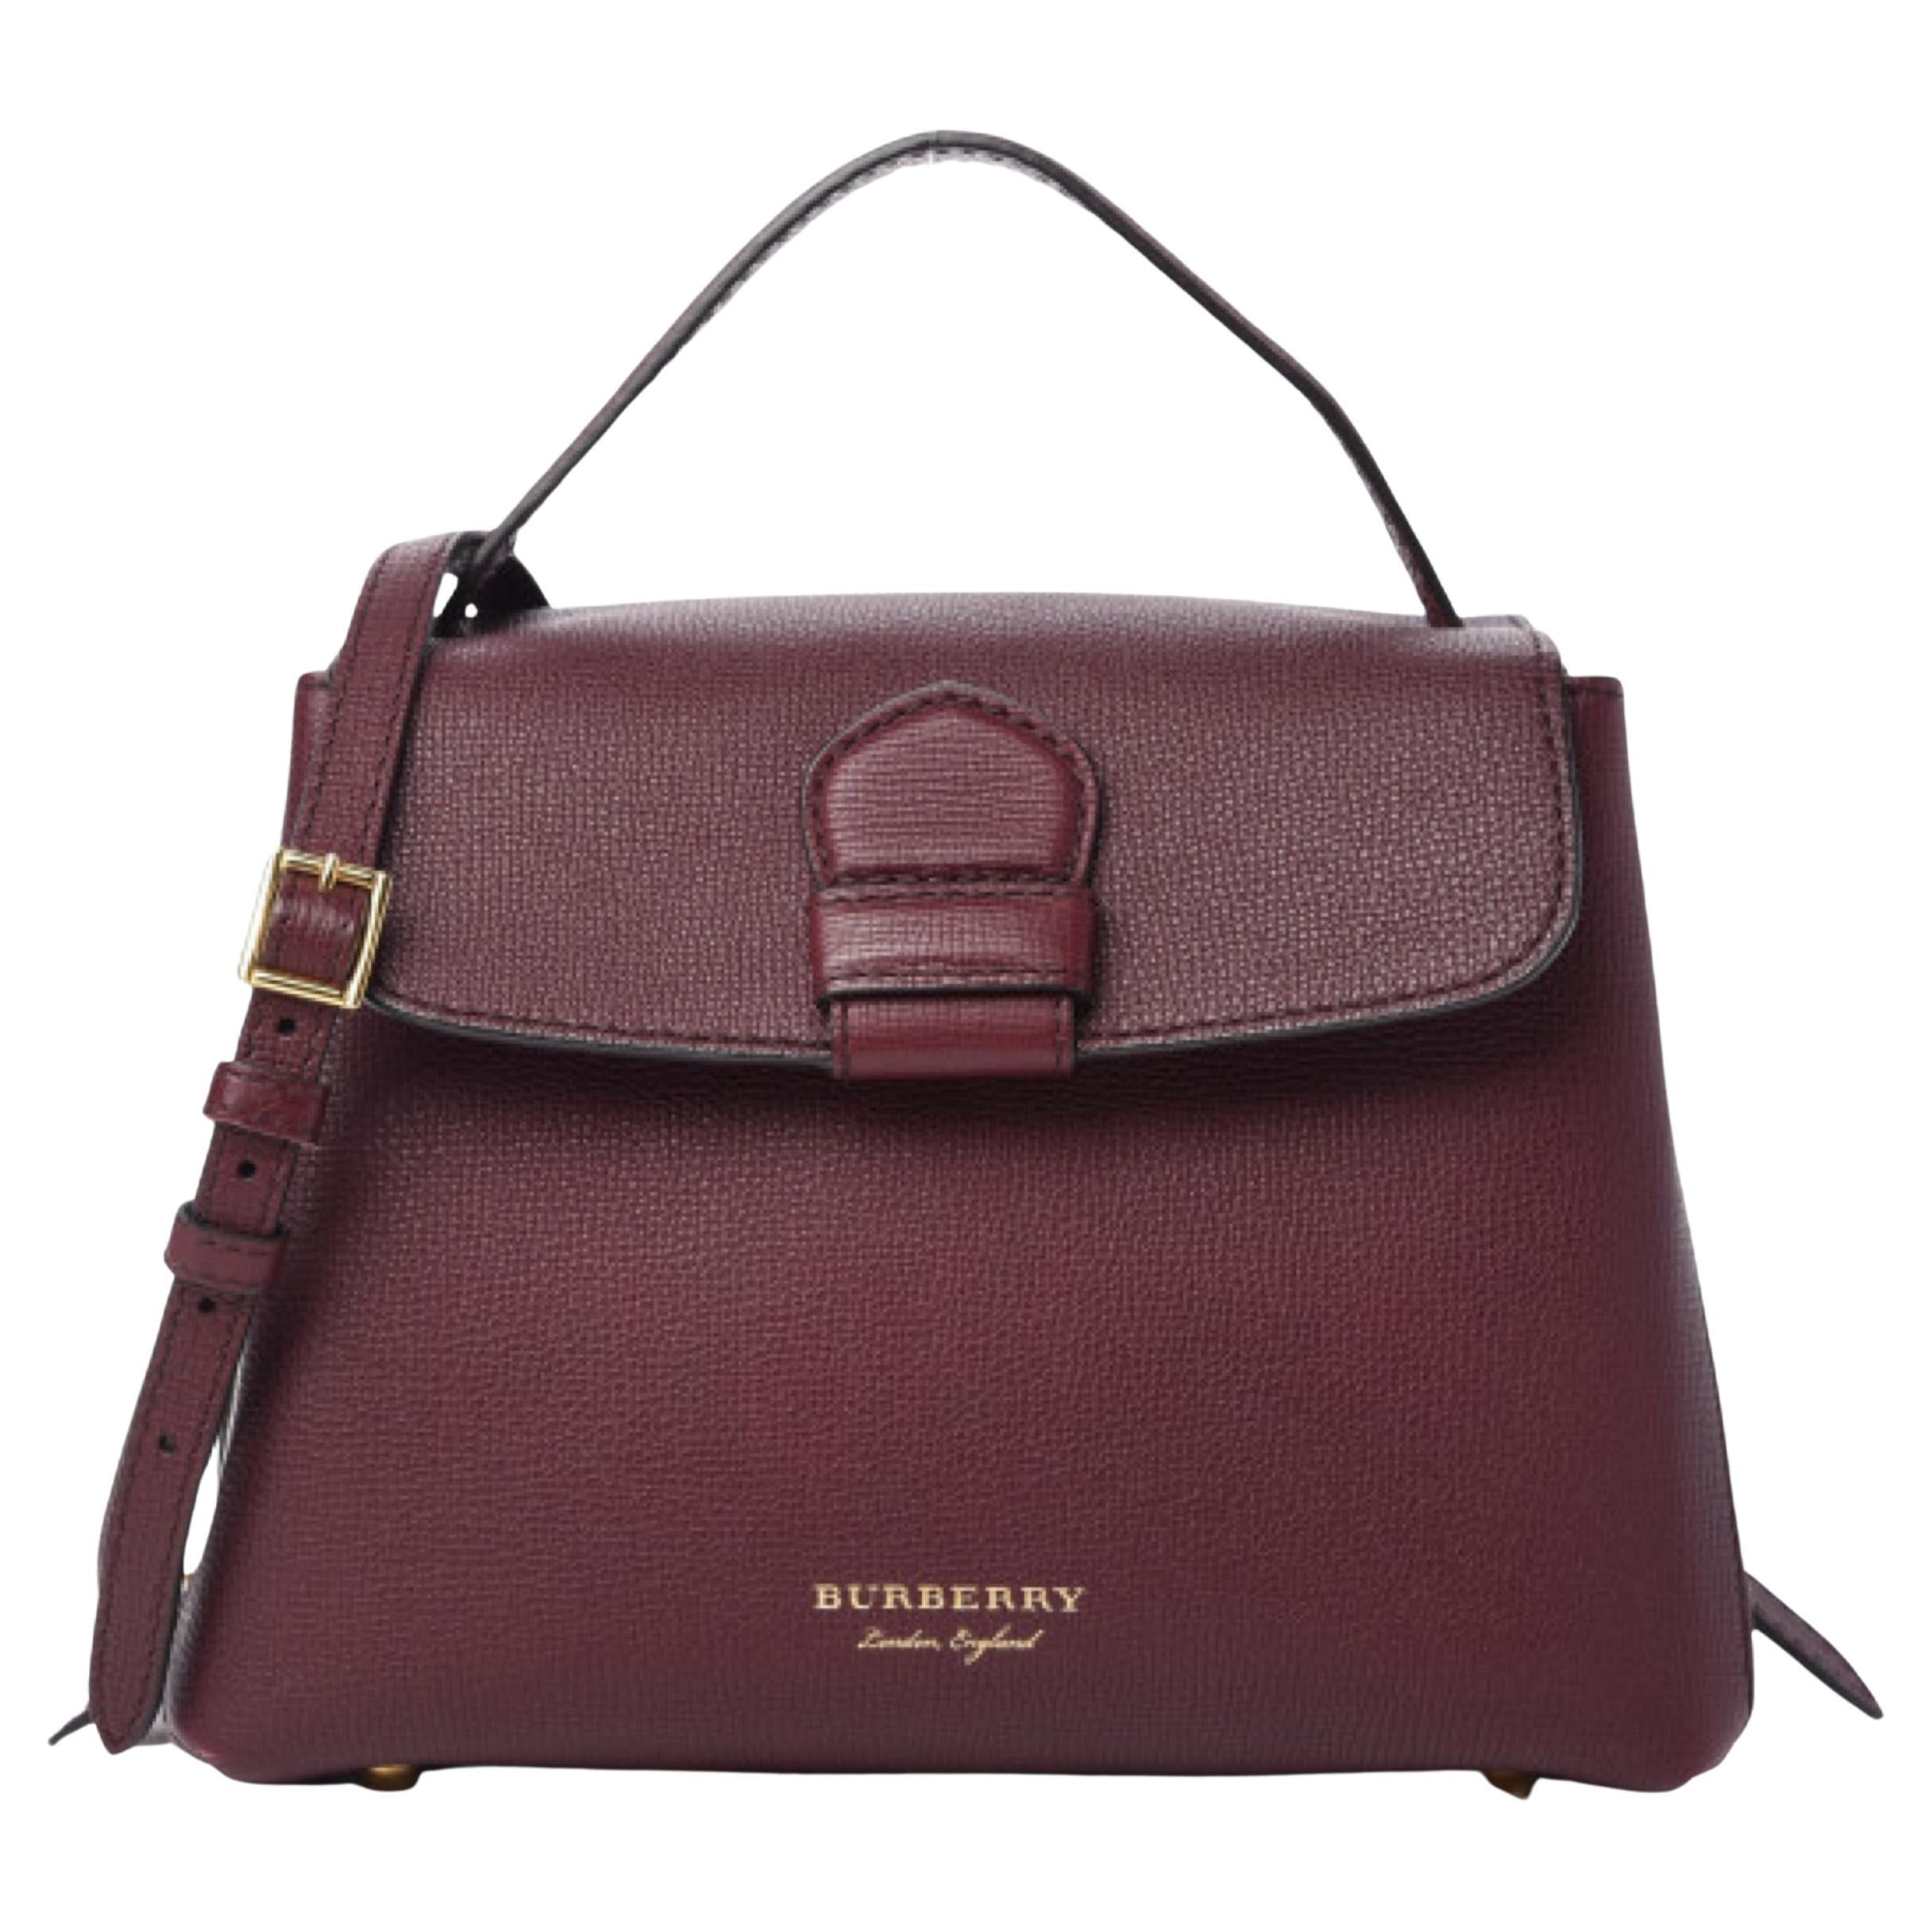 NEW Burberry Burgundy Small Camberley House Check Leather Crossbody Bag